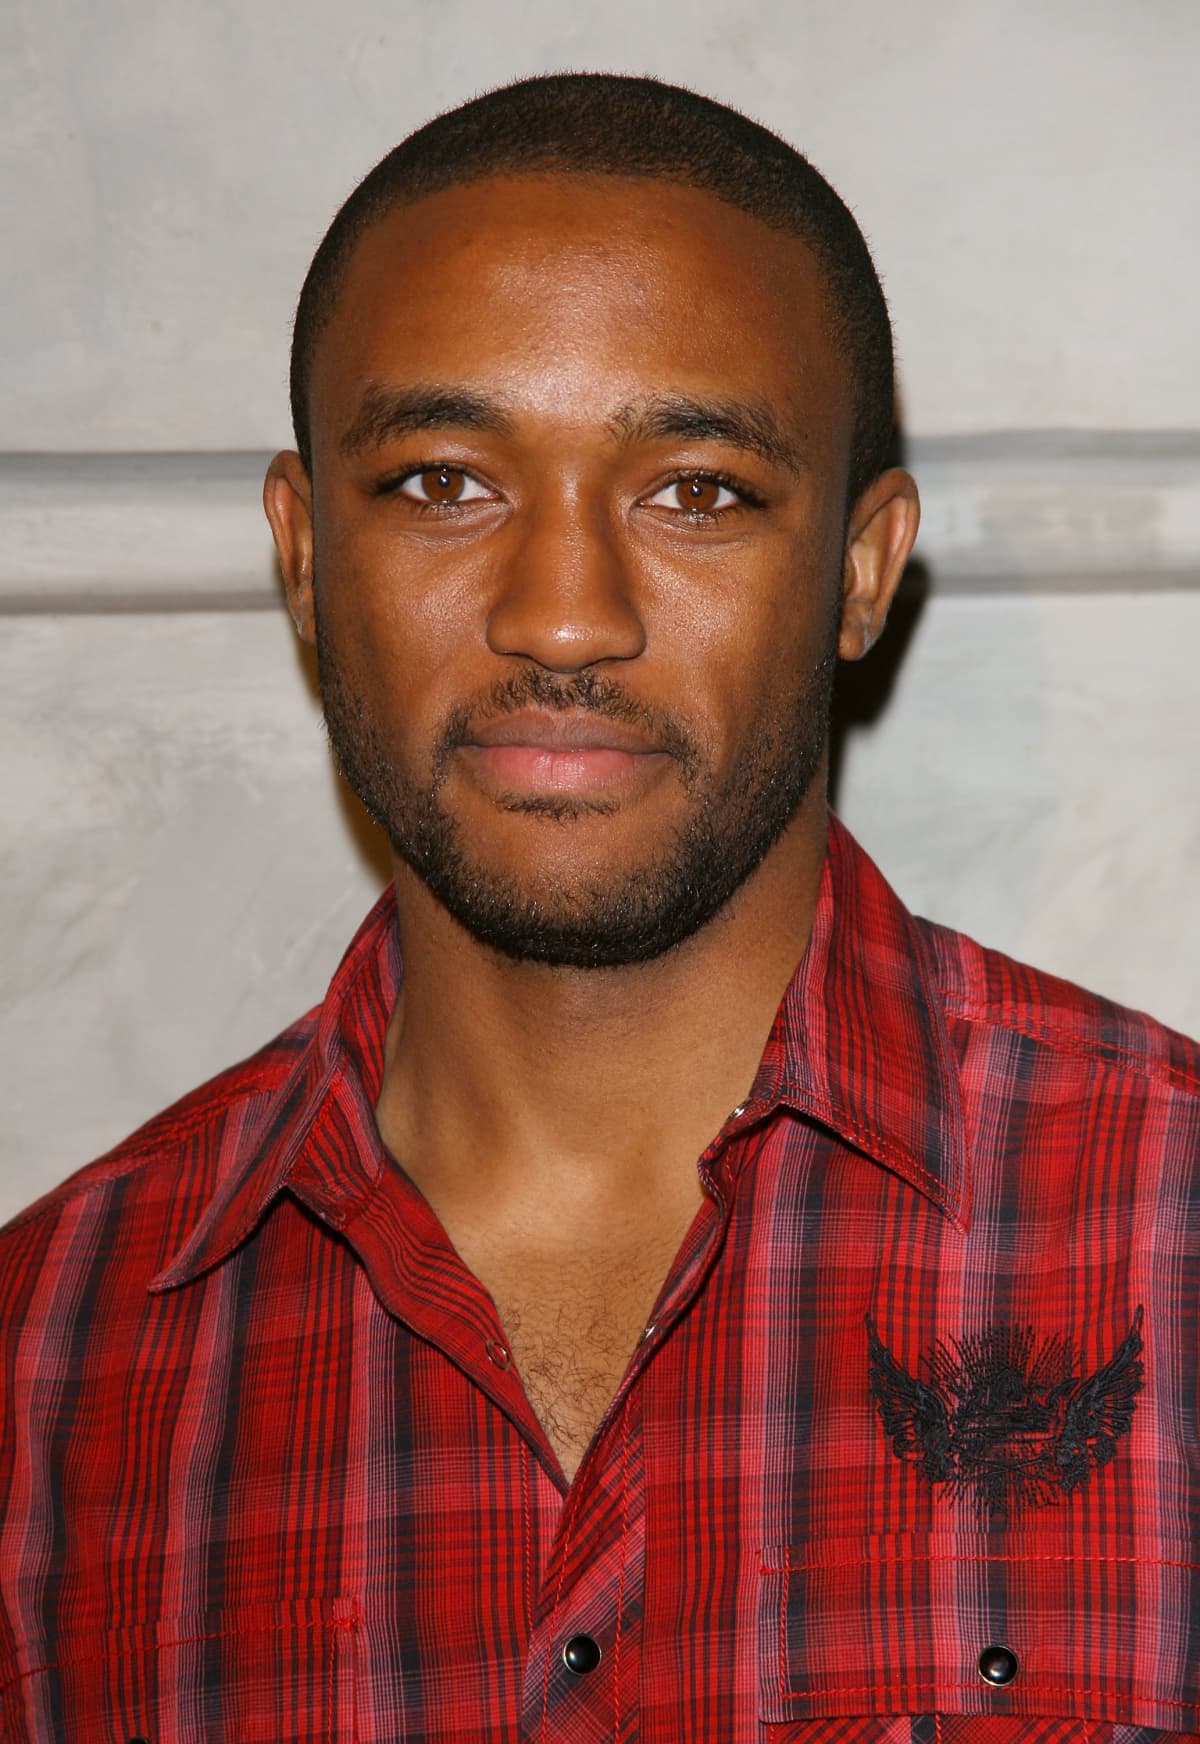 HOLLYWOOD - APRIL 15:  Lee Thompson Young arrives to the Los Angeles premiere of "Sleep Dealer" held at The Montalban Theatre on April 15, 2009 in Hollywood, California.  (Photo by Michael Tran/FilmMagic)